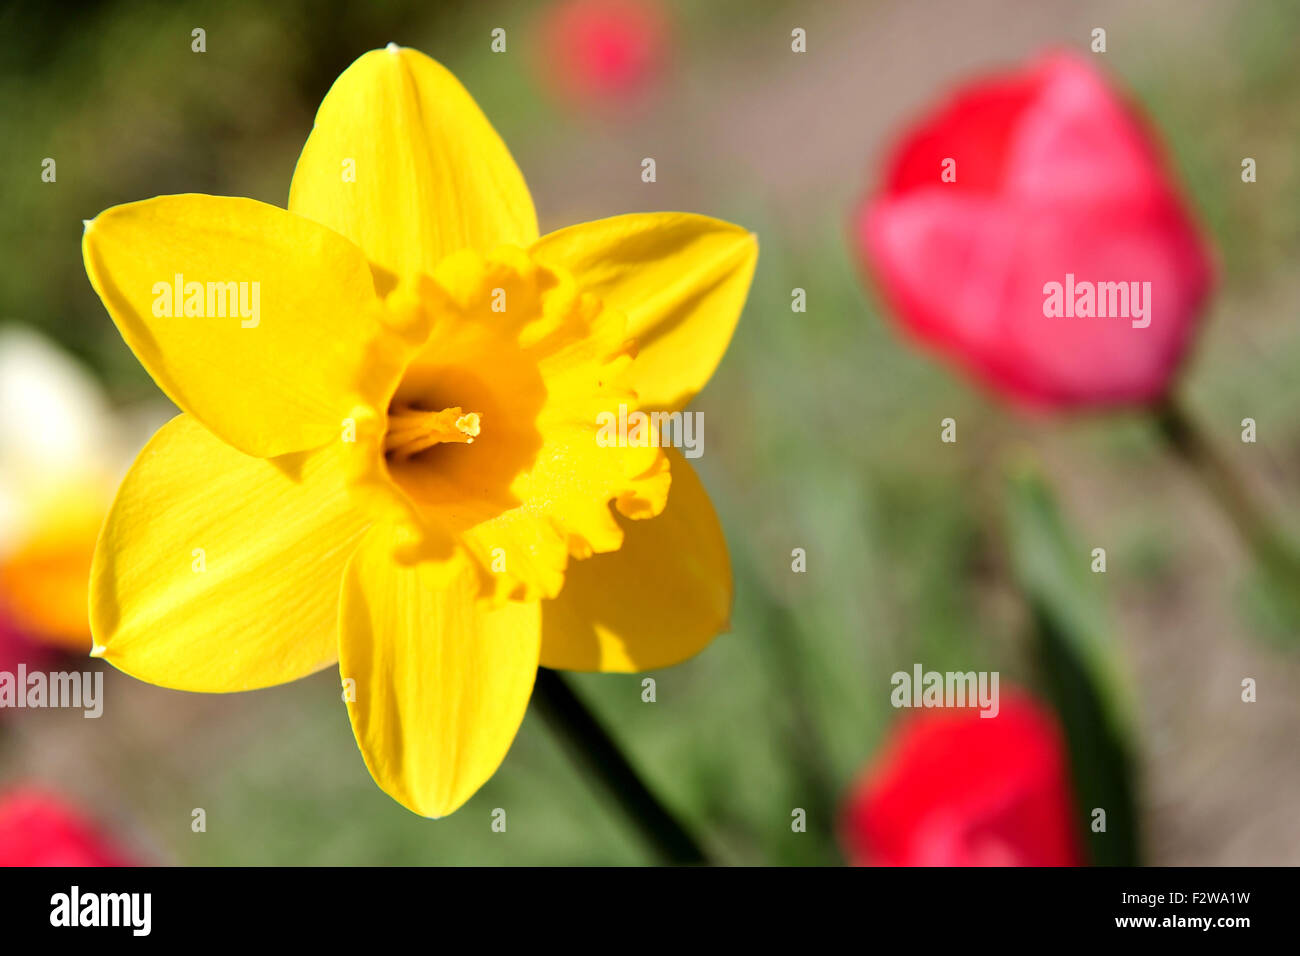 09.05.2015, Wardenburg, Lower Saxony, Germany - Narcissus and tulips in a garden. 0HD150509D050CAROEX.JPG - NOT for SALE in G E Stock Photo